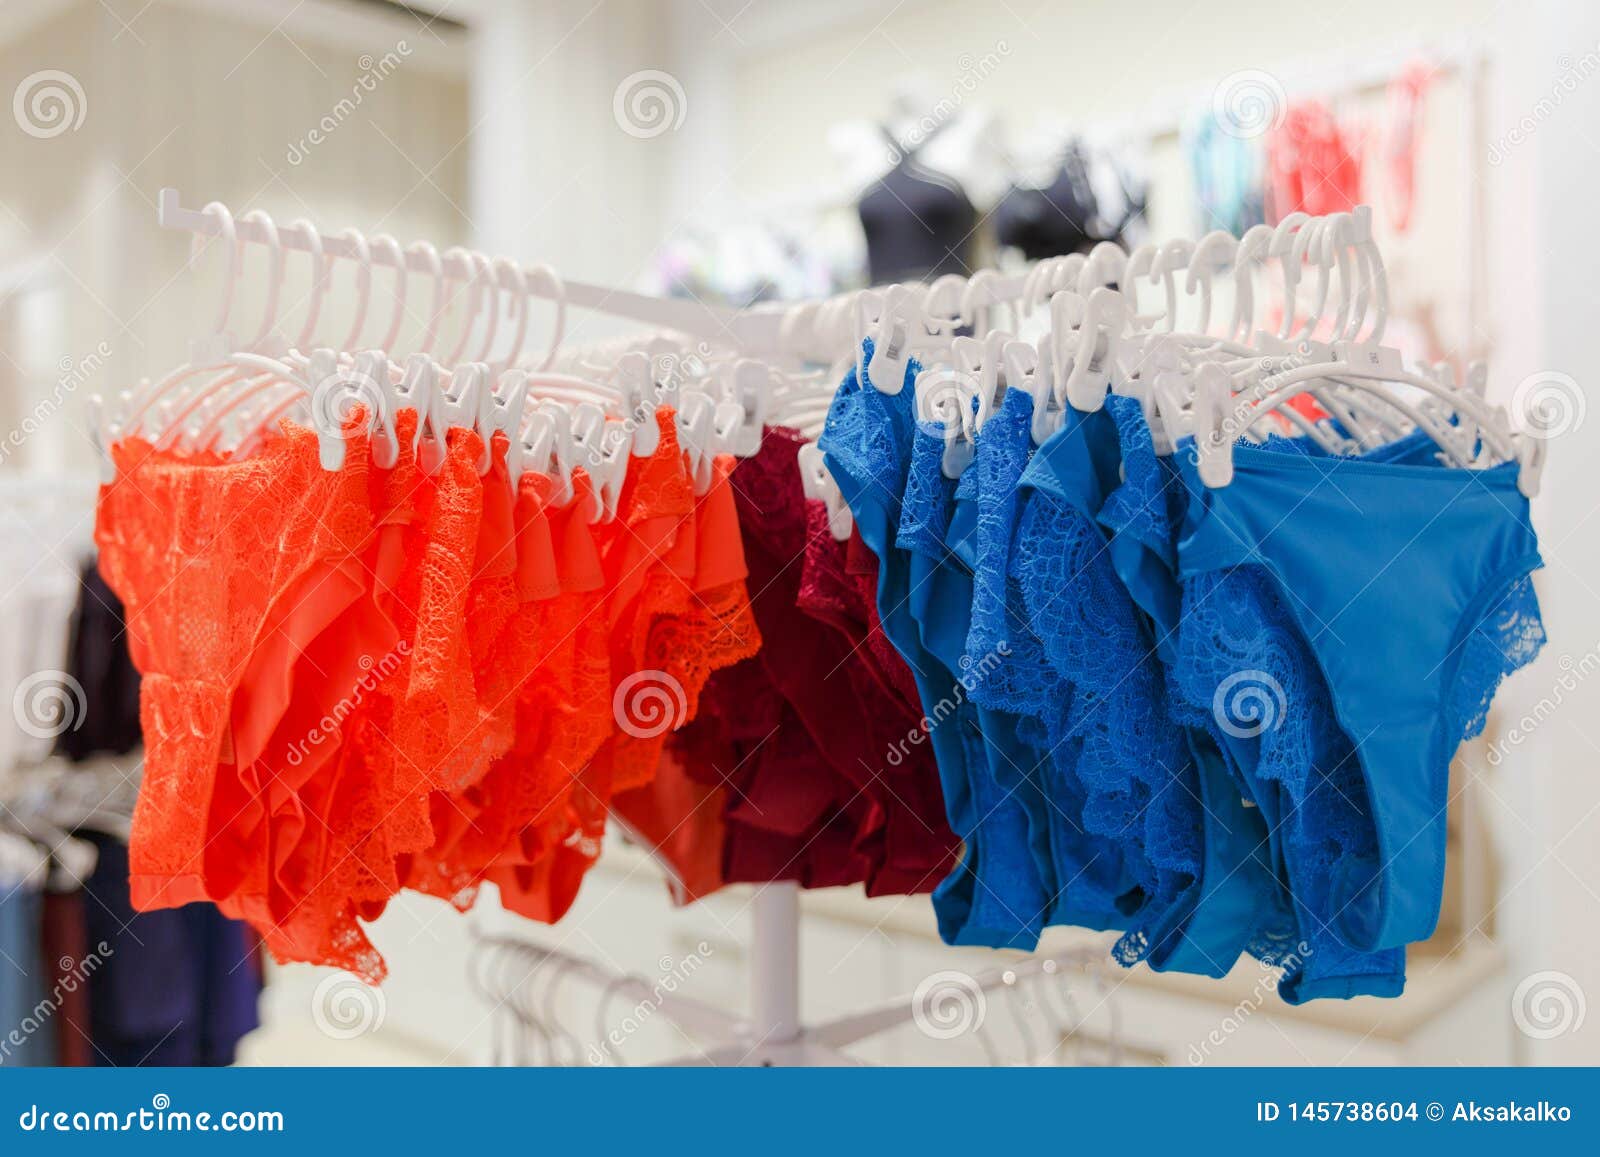 Shop Woman Underwear Panties in the Shopping Mall Stock Photo - Image of  cloth, department: 145738604